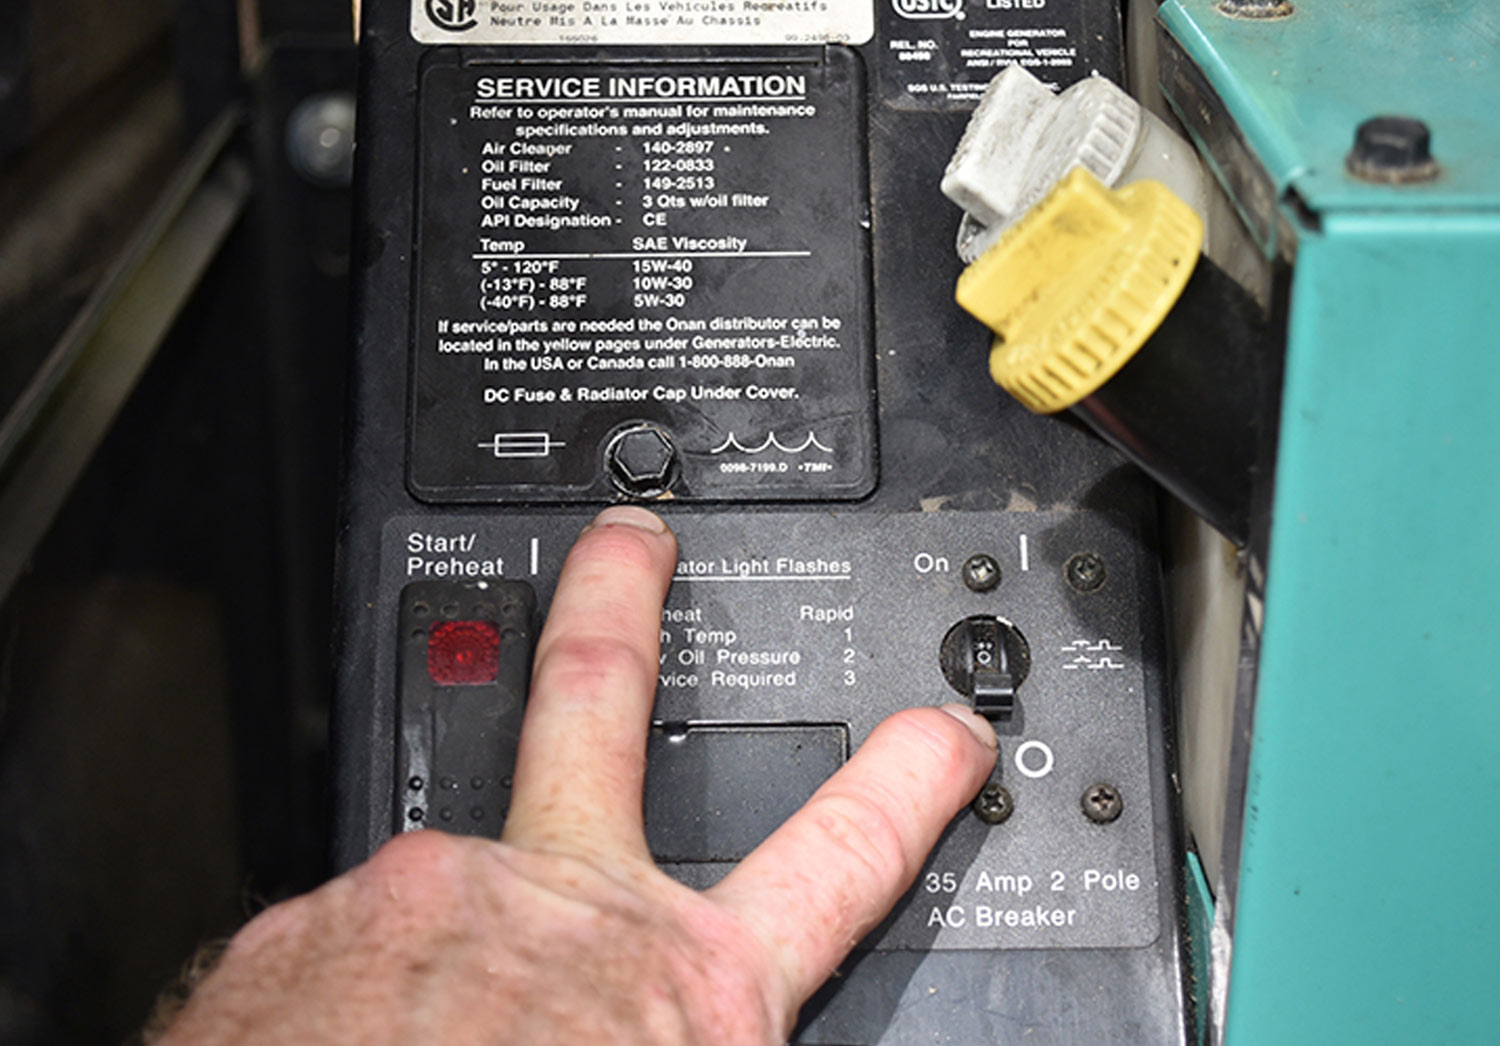 mechanics fingers point to the “Off” switch for the generator and the oil fill point and radiator fill point